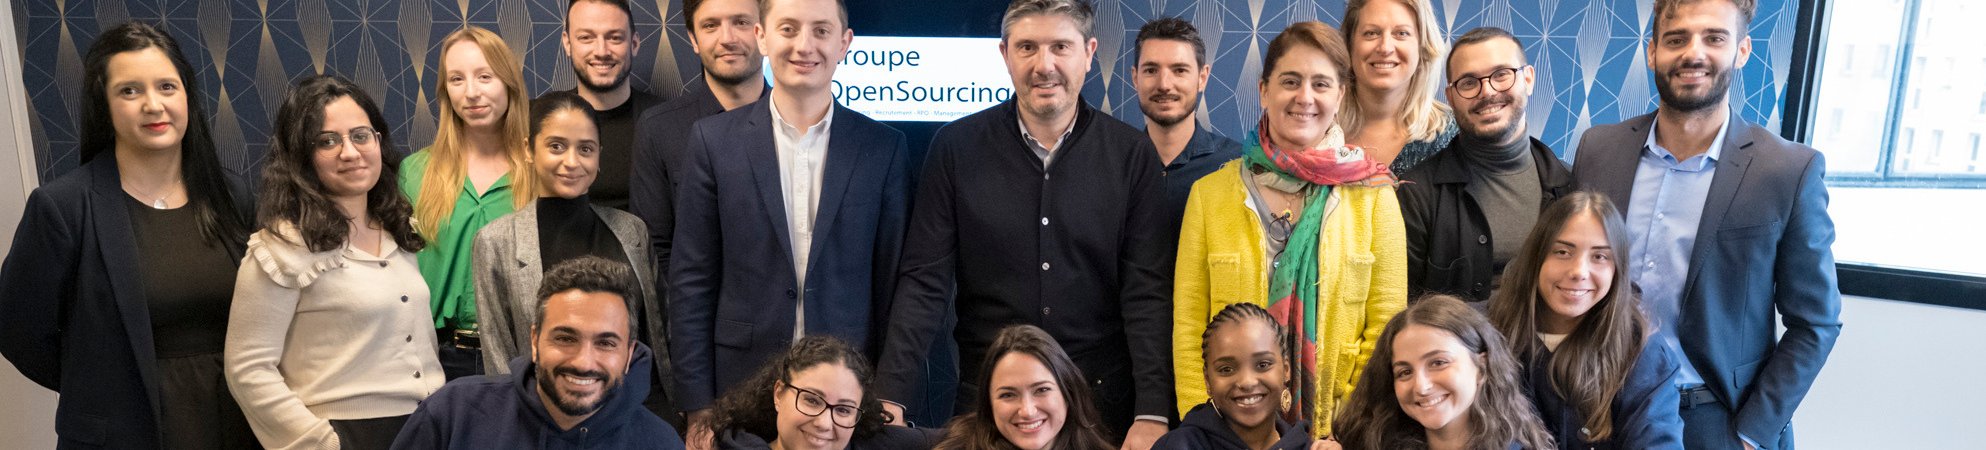 Groupe OpenSourcing